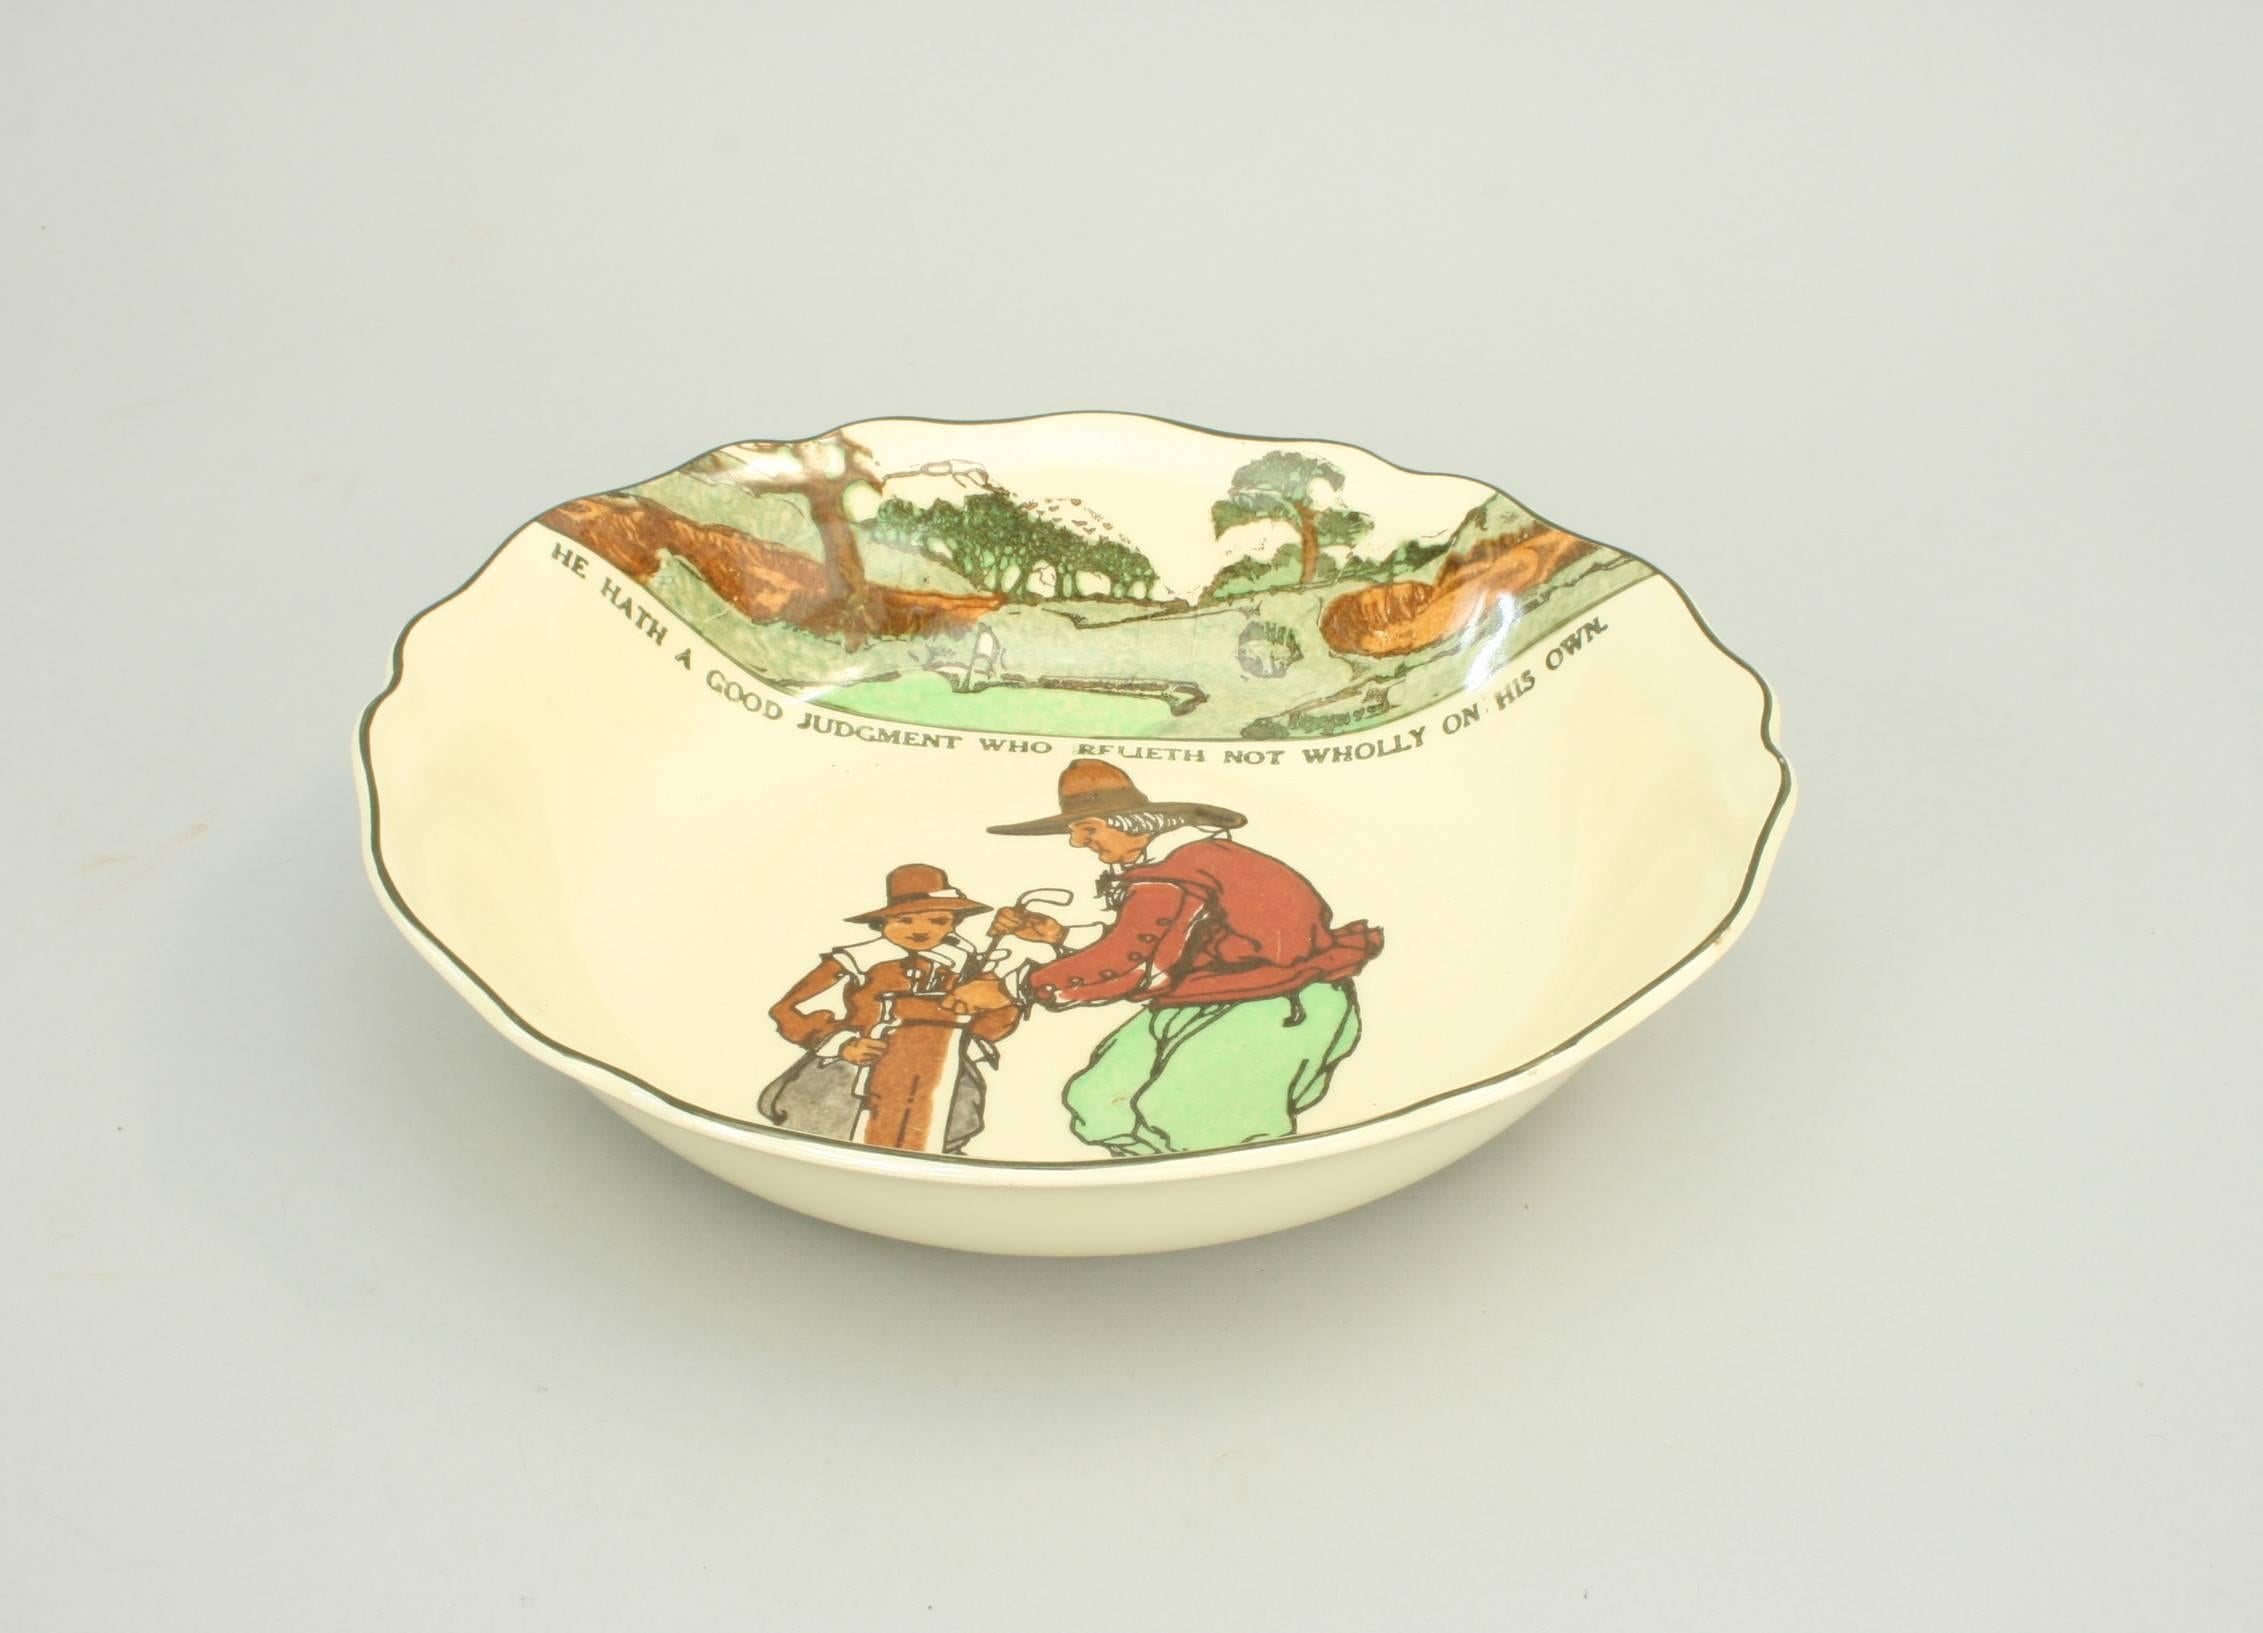 A Royal Doulton bowl with polychrome golfing scene entitled: 'He Hath A Good Judgment Who Relieth Not Wholly On His Own' by Charles Crombie.
Charles 'Chas' Crombie (1885 ? 1967) was an illustrator whose work is well-known to the collector. His